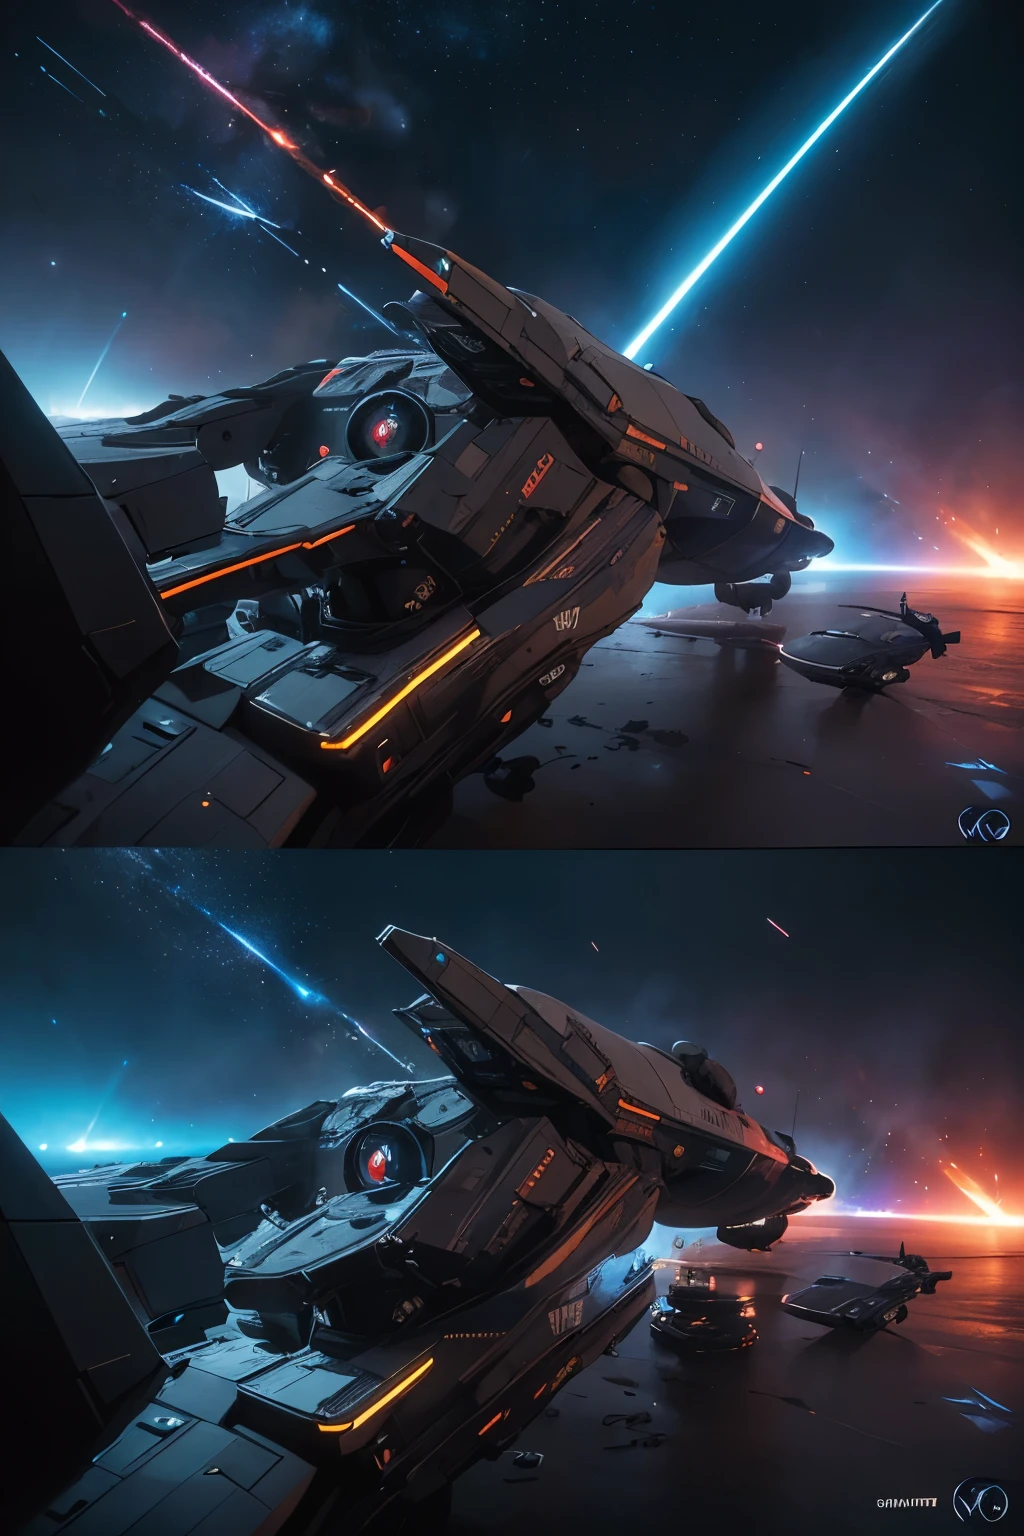 ((Epic Space War Masterpiece)), ((High-Resolution Galactic Conflict)), ((hyper-realistic Starfleet Battles)), (detailed Spacecraft Destructions), (Photorealistic:2.0), Spacemen in combat suits, (futuristic), (alien species), (advanced weapons), (energy shields), (laser blasts), (planetary ground assaults), (space-drifting debris), (cosmic backdrop), (Neon-lit starships), (holographic interface), (high-tech control consoles), (ai-driven starfighters), (stellar explosions), (dark matter effects), (warp speed